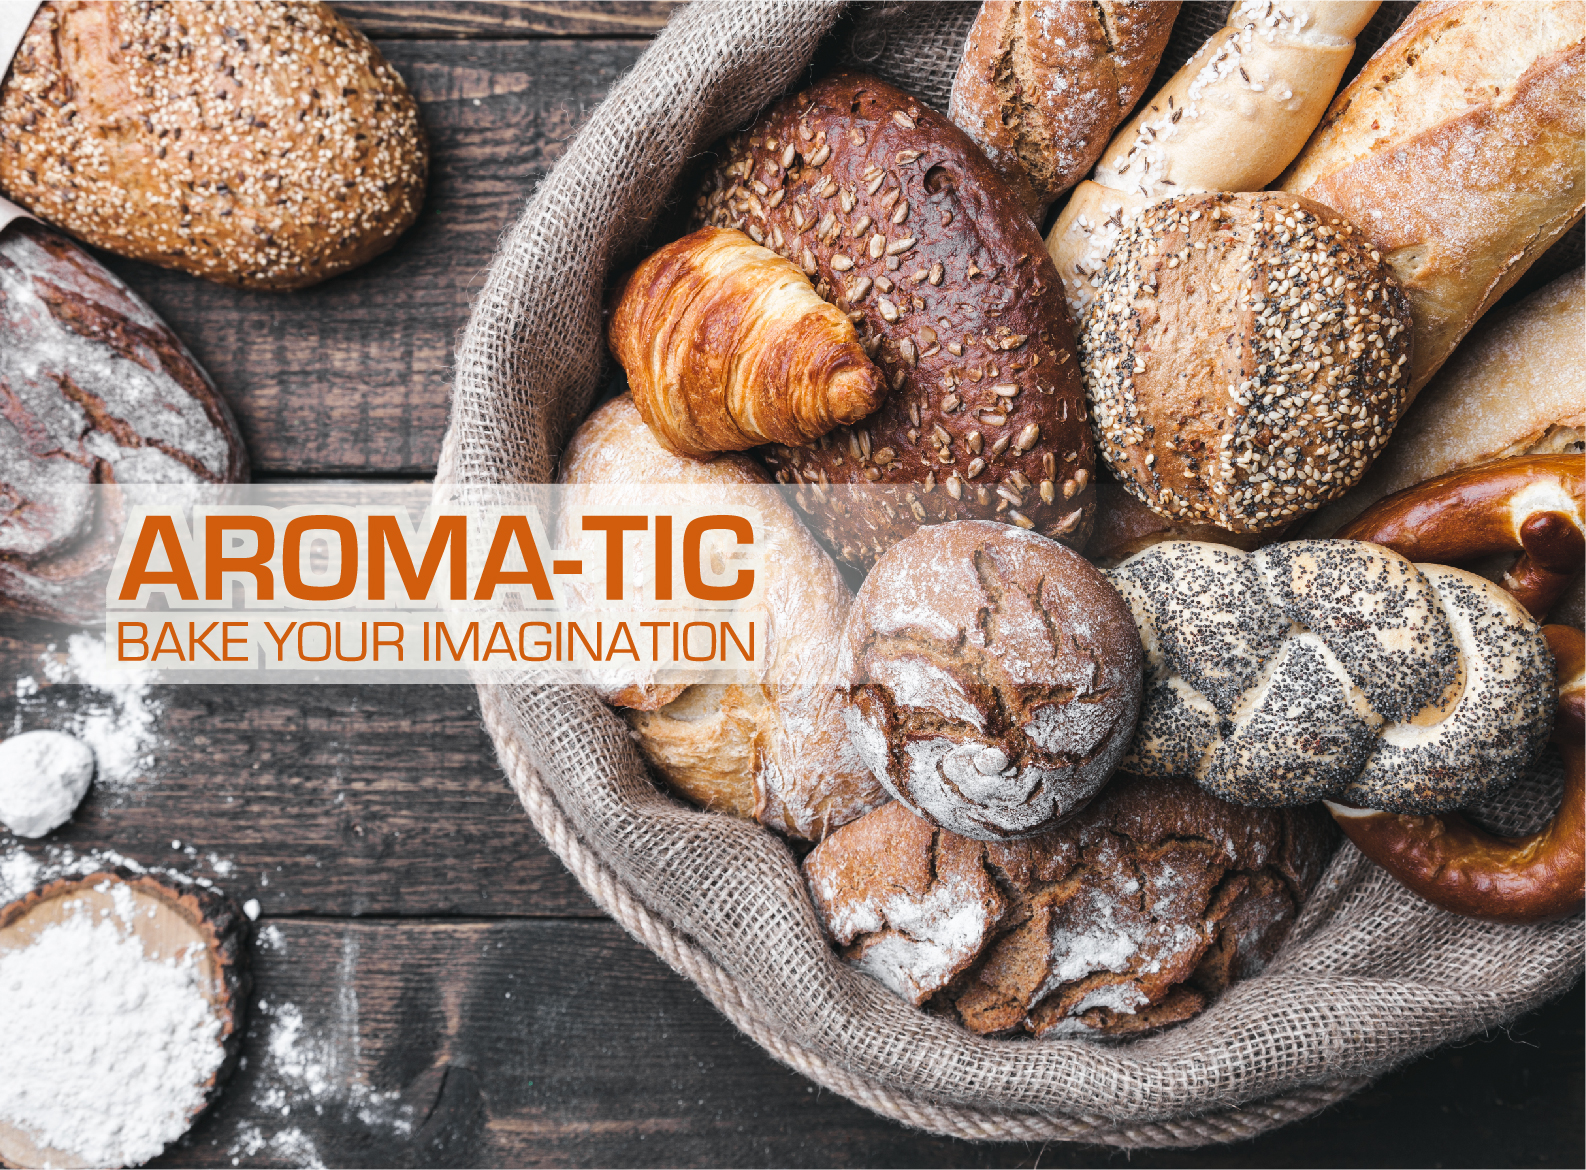 Aroma-tic - Bake Your Imagination with a gently dried sourdough